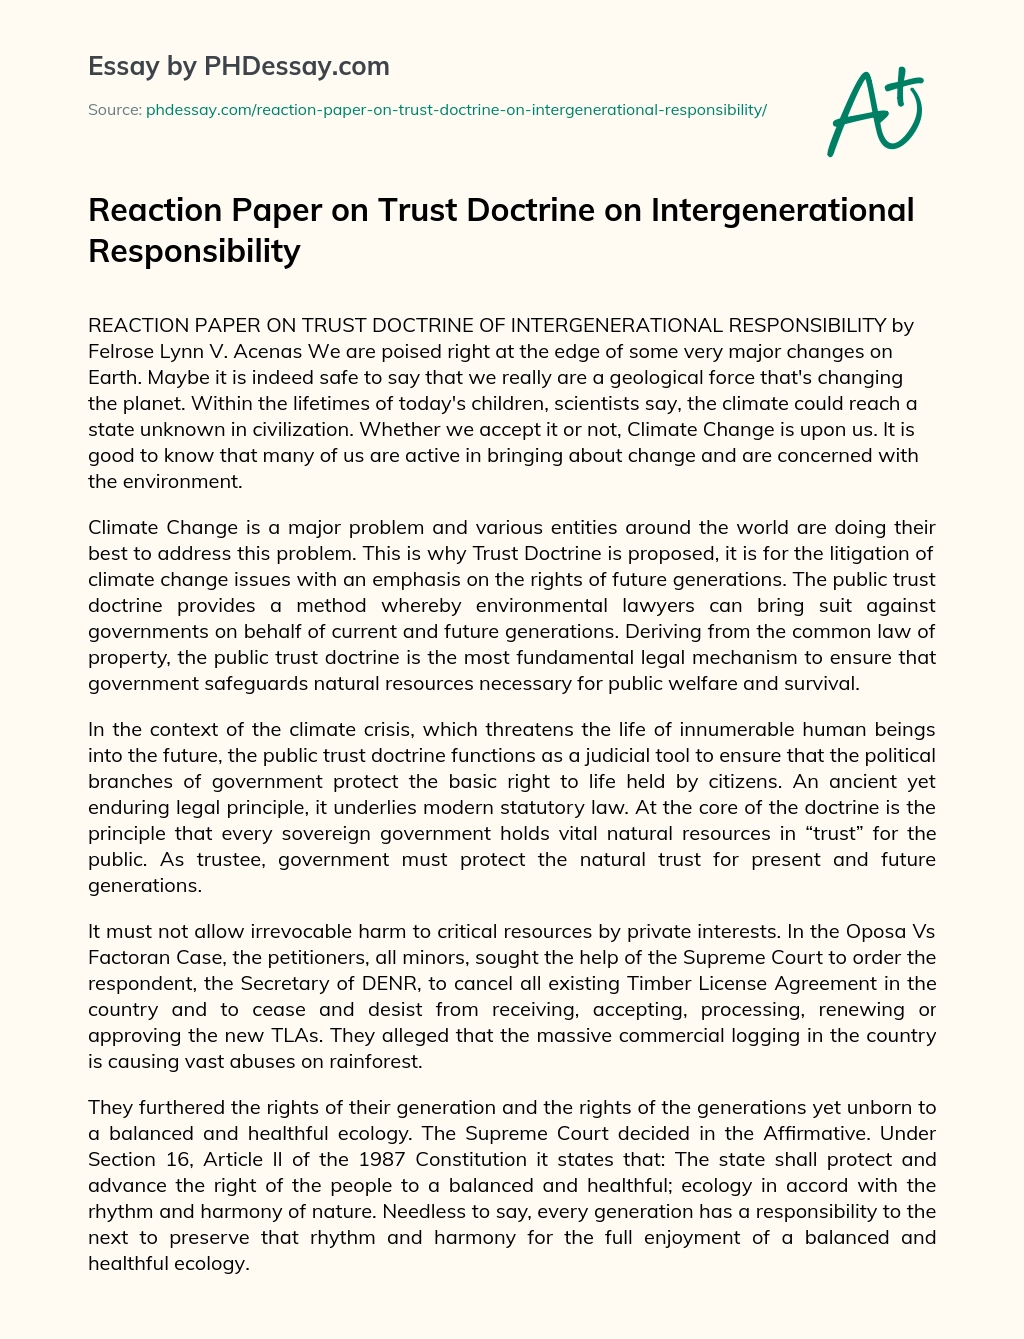 Reaction Paper on Trust Doctrine on Intergenerational Responsibility essay